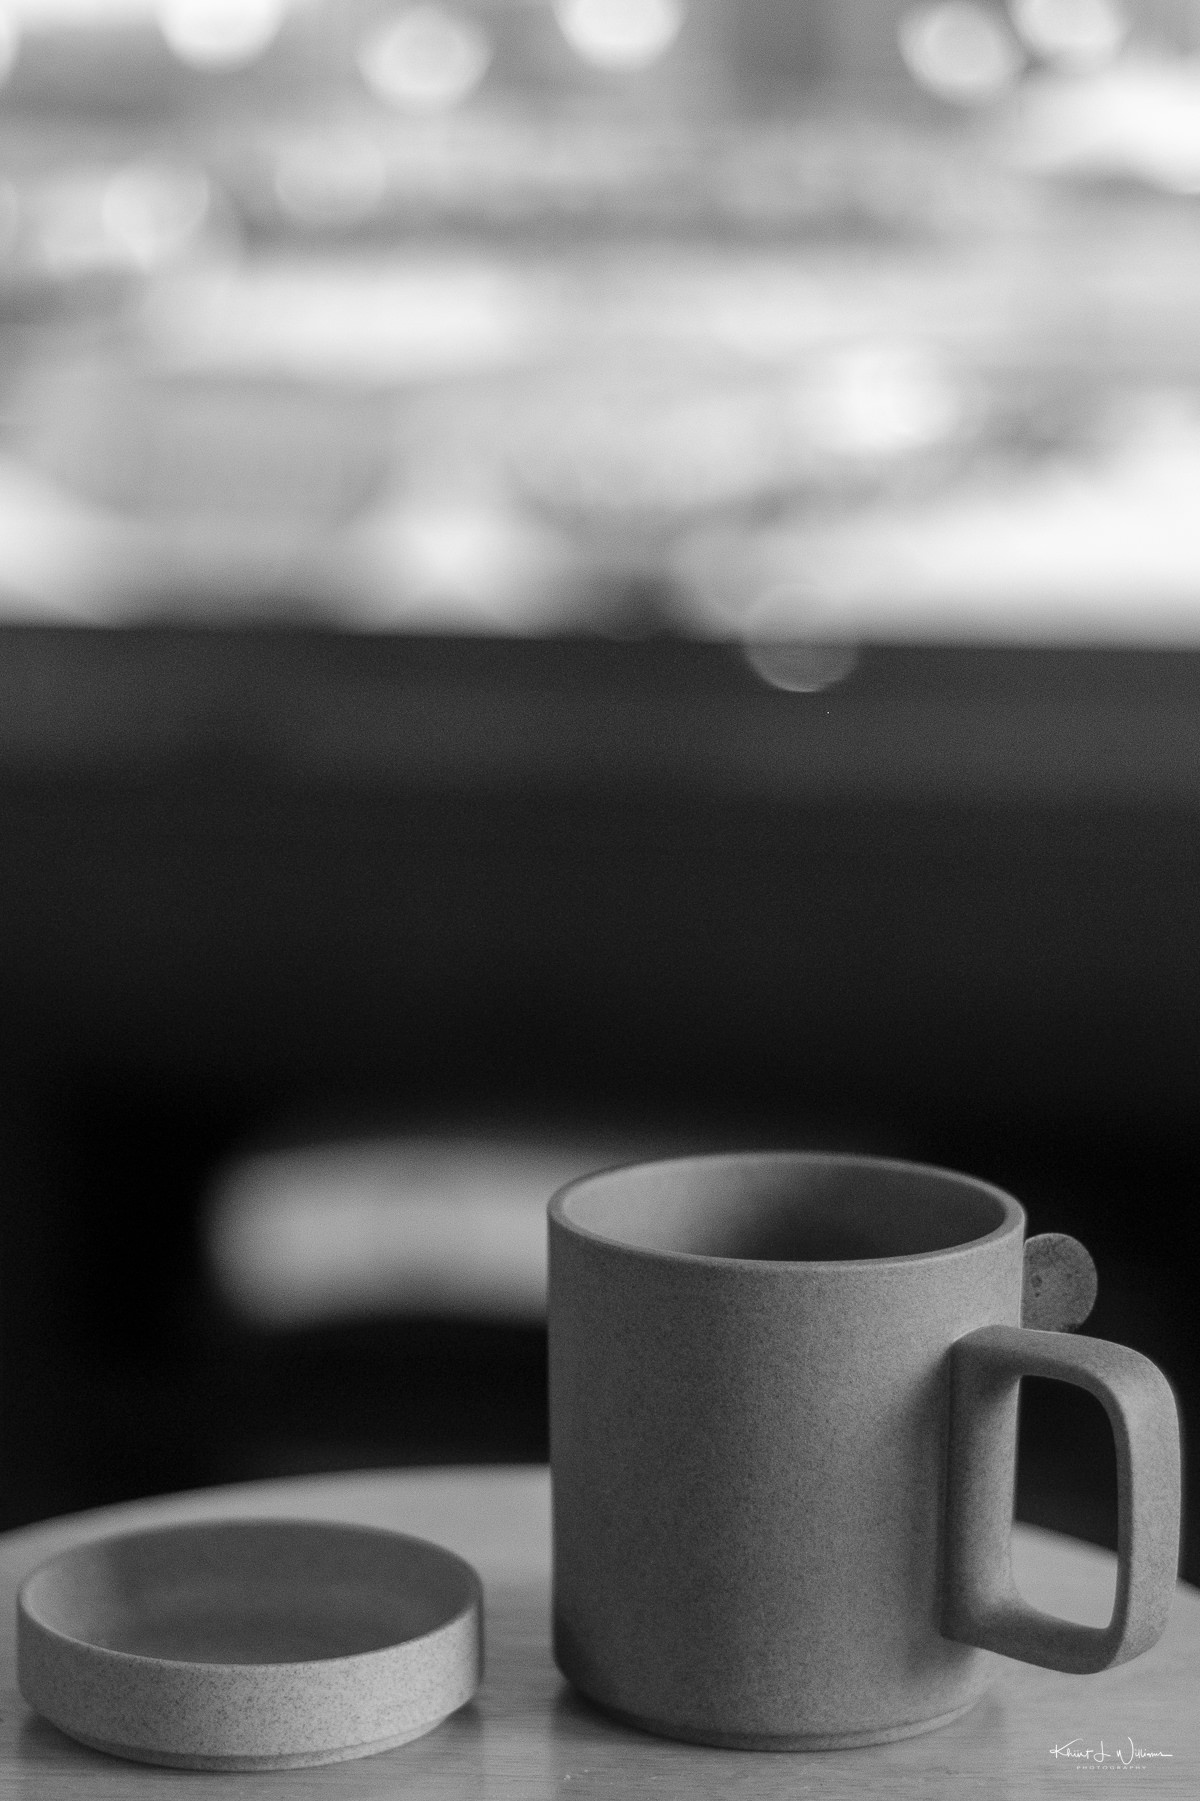 Coffee mug and saucer in black and white